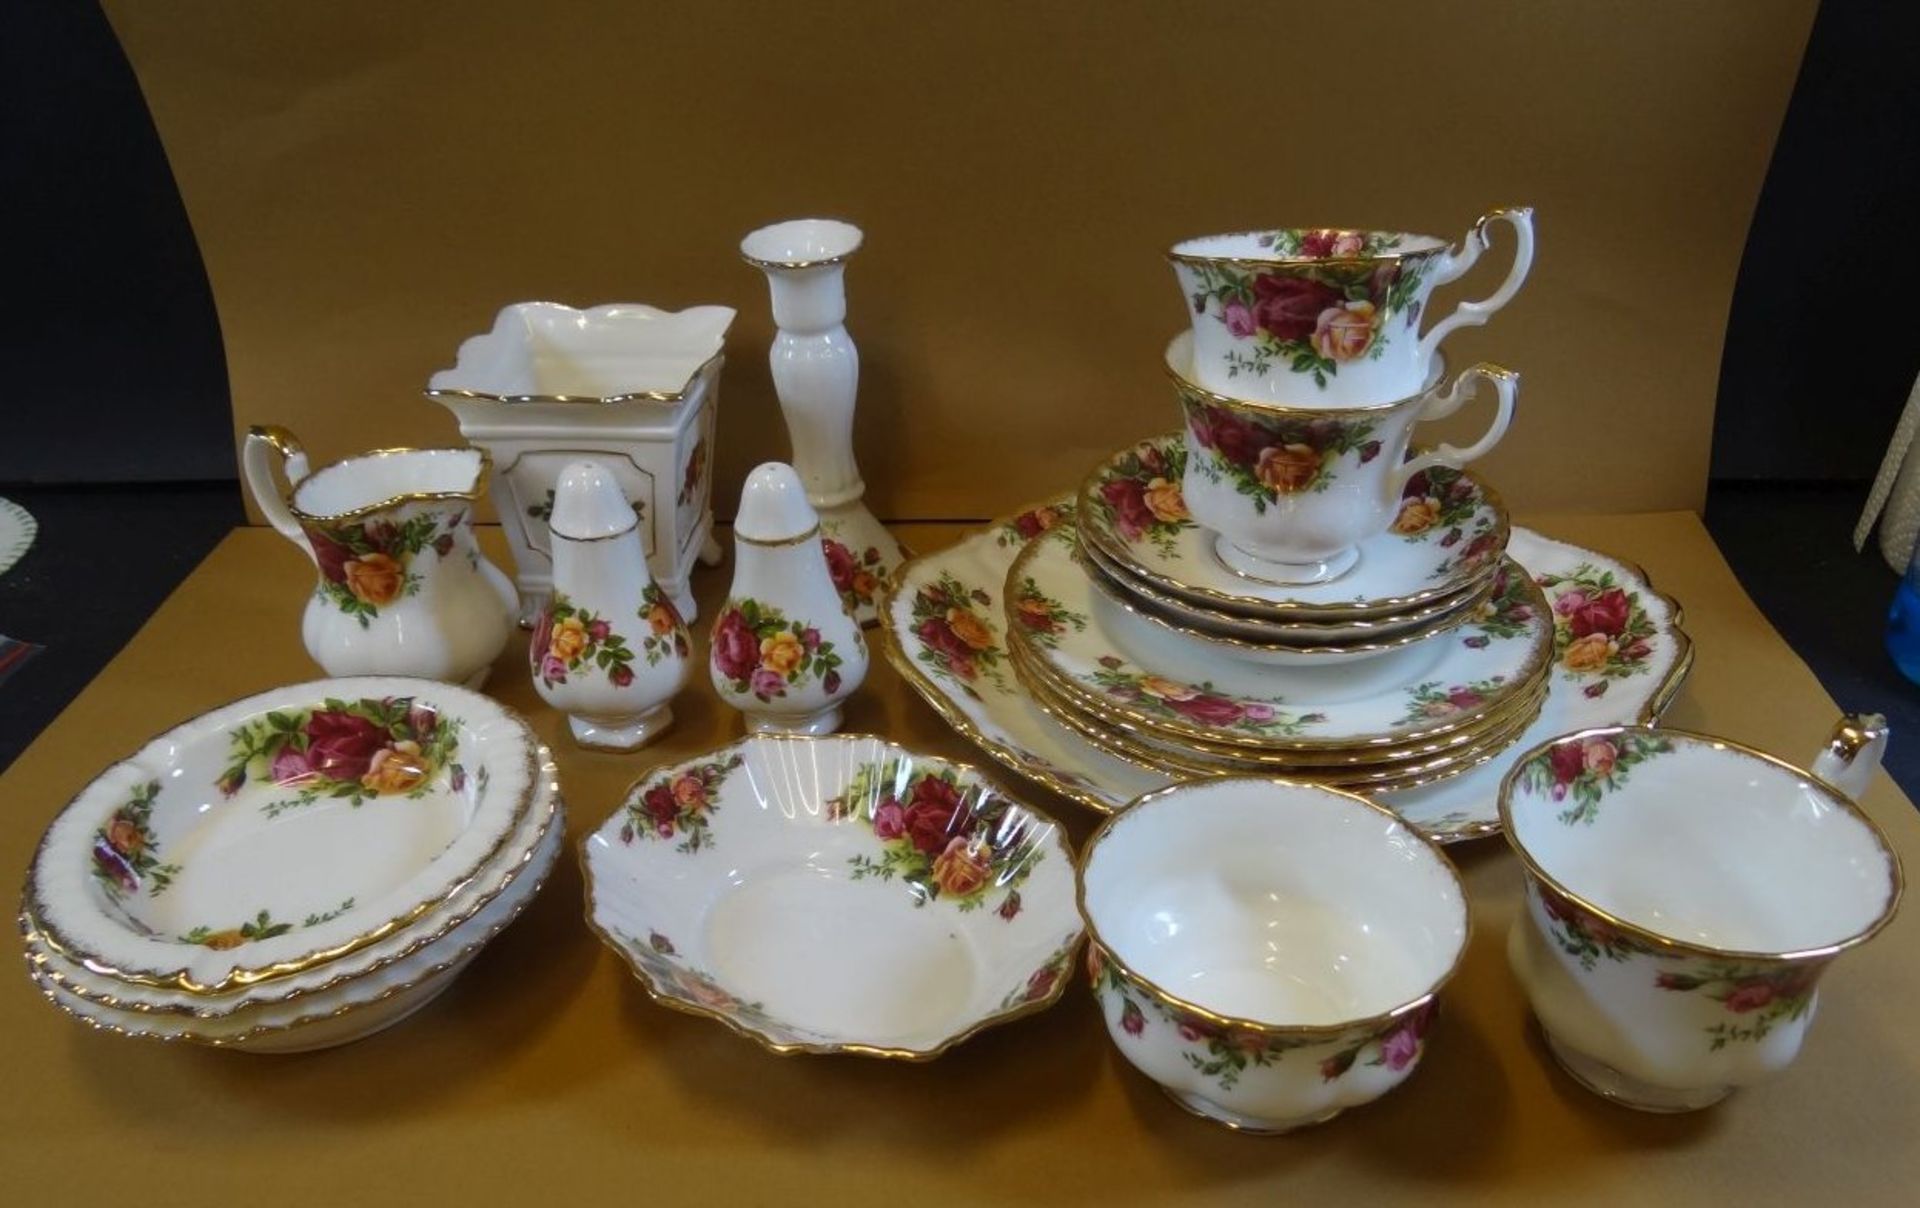 21 Serviceteile "Royal Albert" Old Country Roses, 1x Chip